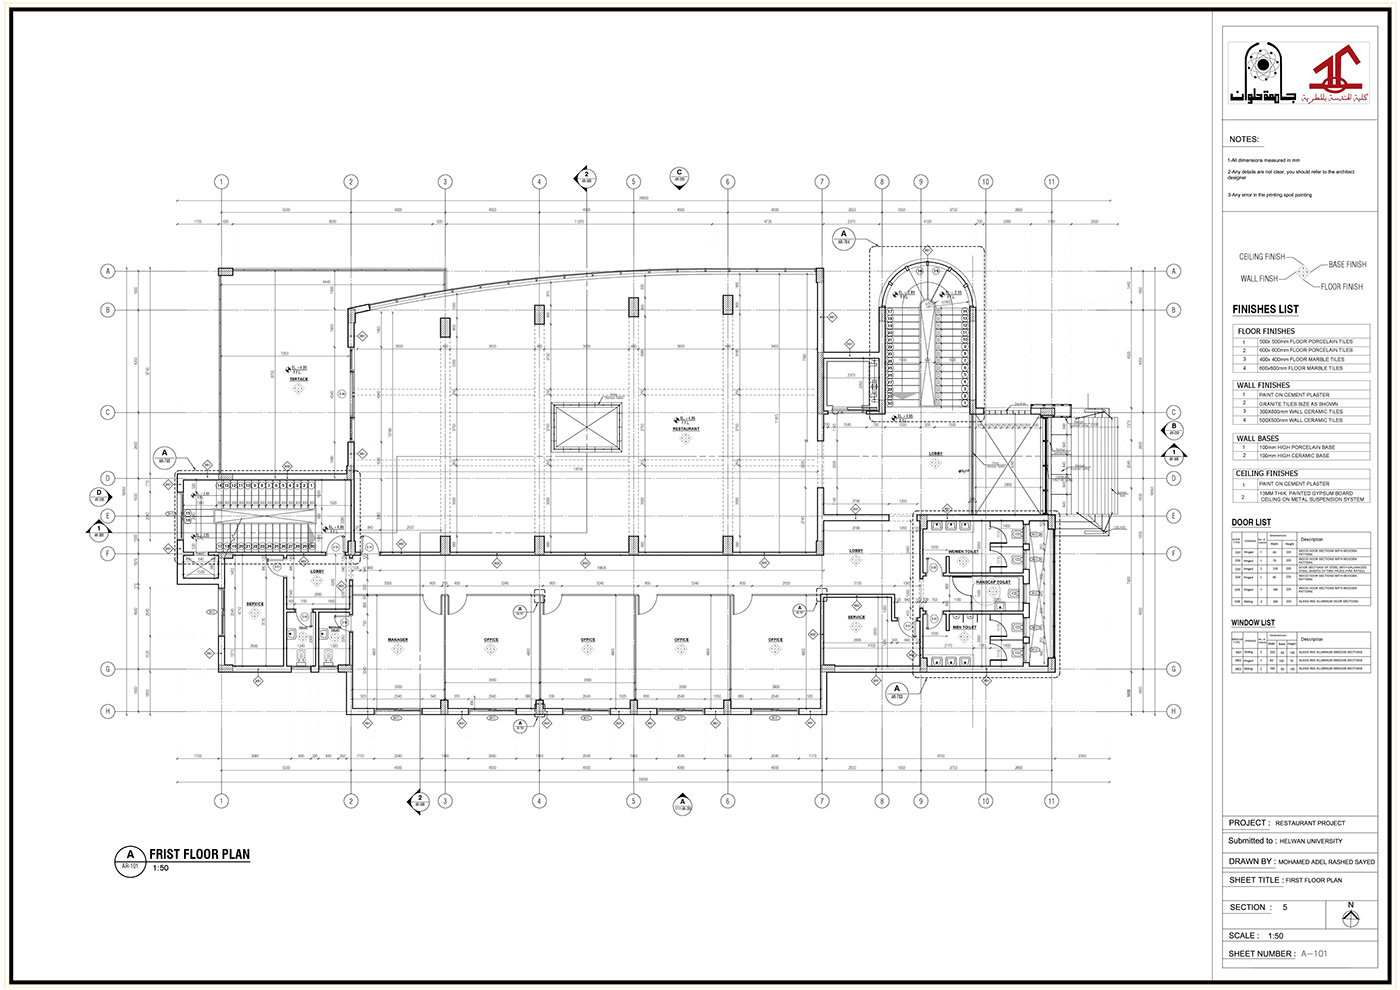 AutoCAD construction details drawings lounge restaurant revit shopdrawing working working drawings